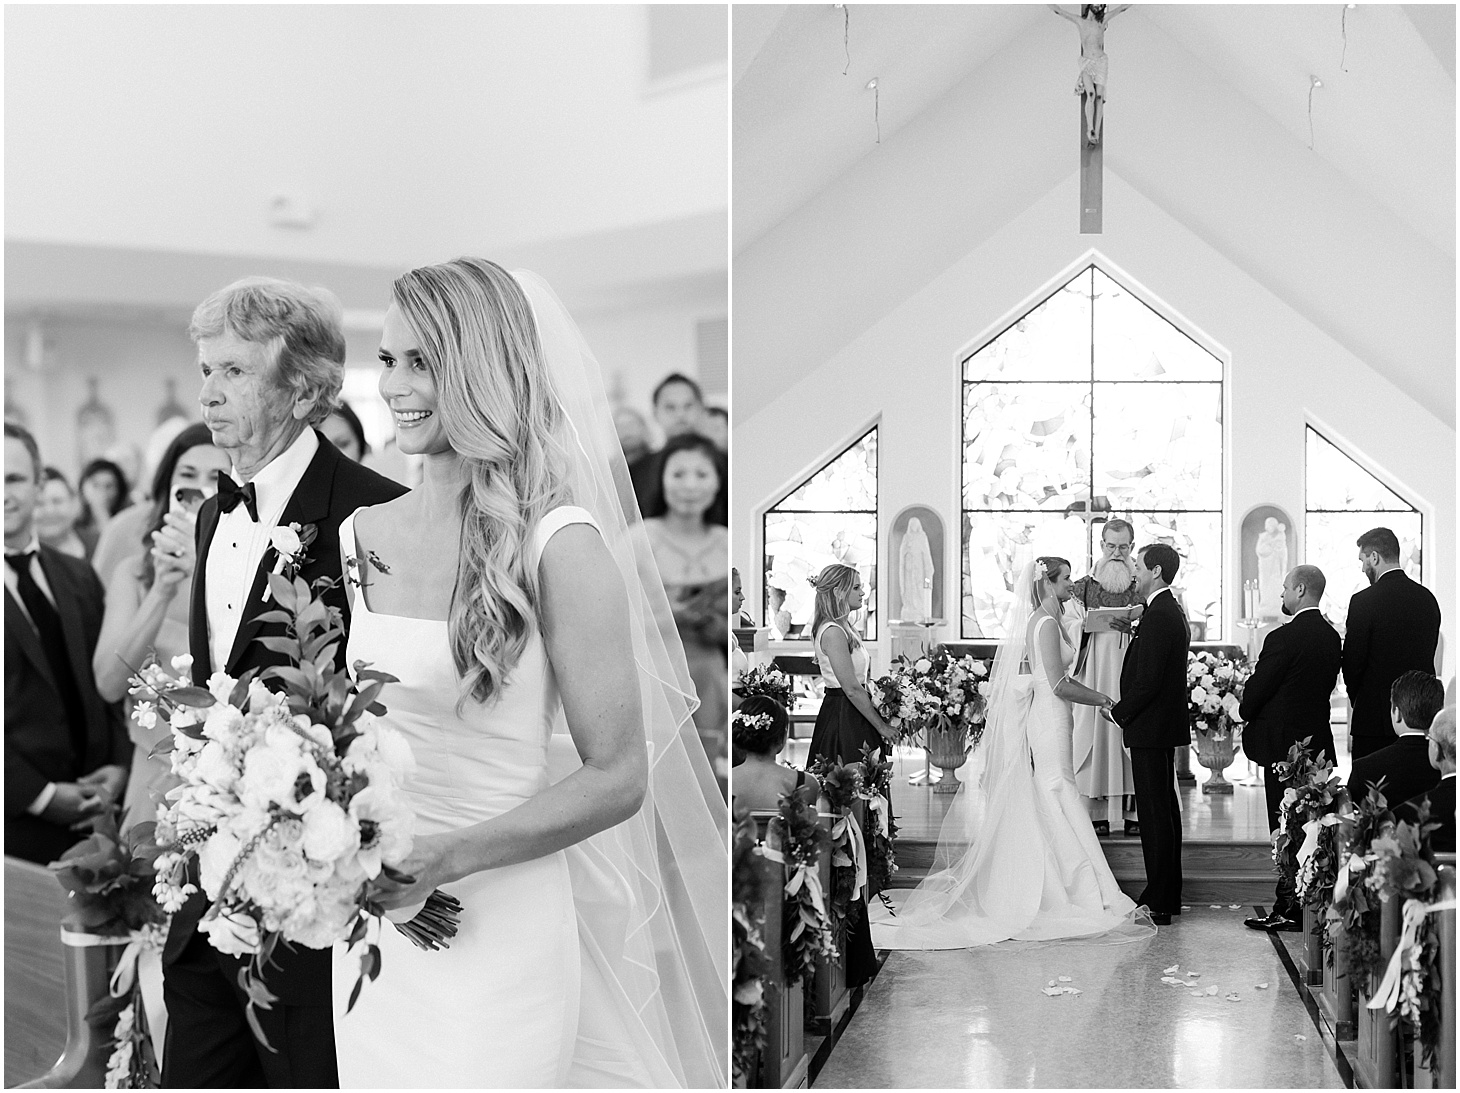 Ceremony at St. Isidore the Farmer Catholic Church, Green and White Summer Wedding at The Inn at Willow Grove, Sarah Bradshaw Photography, DC Wedding Photographer